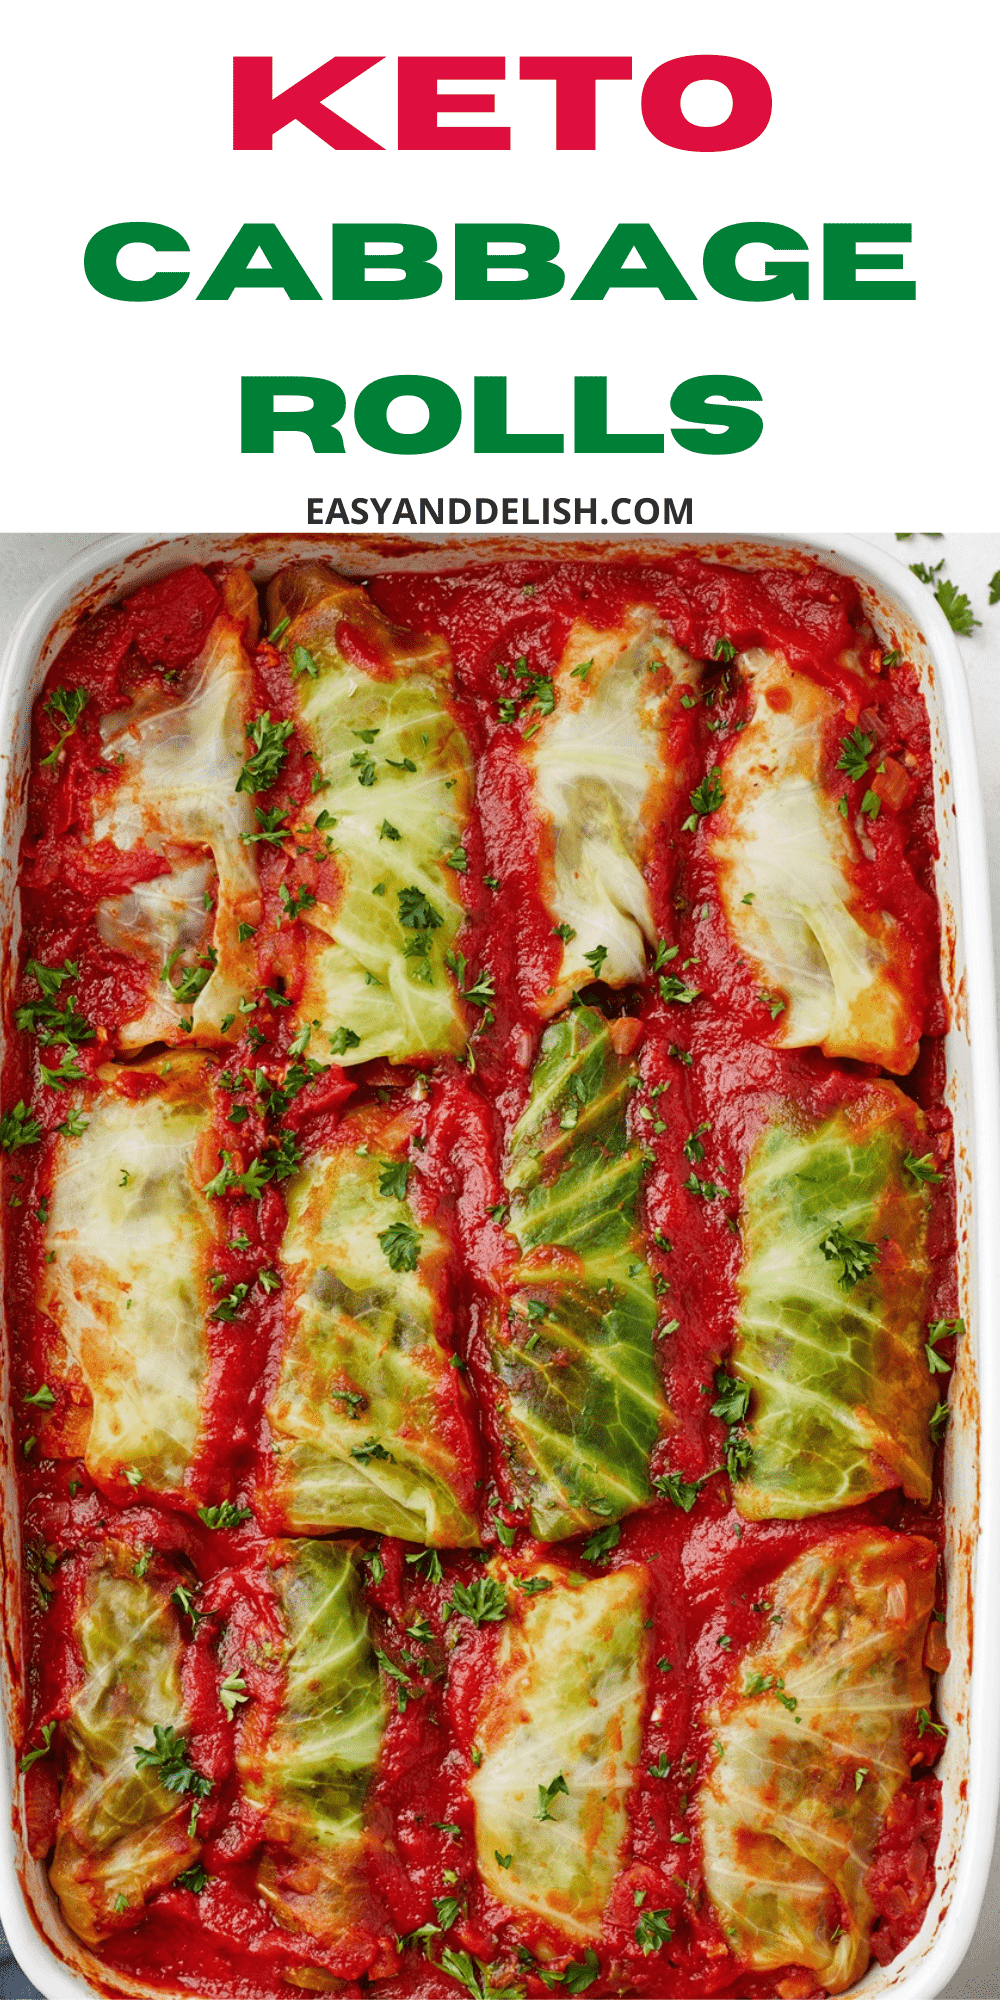 CLOSE UP OF KETO CABBAGE ROLL IN A BAKING DISH.